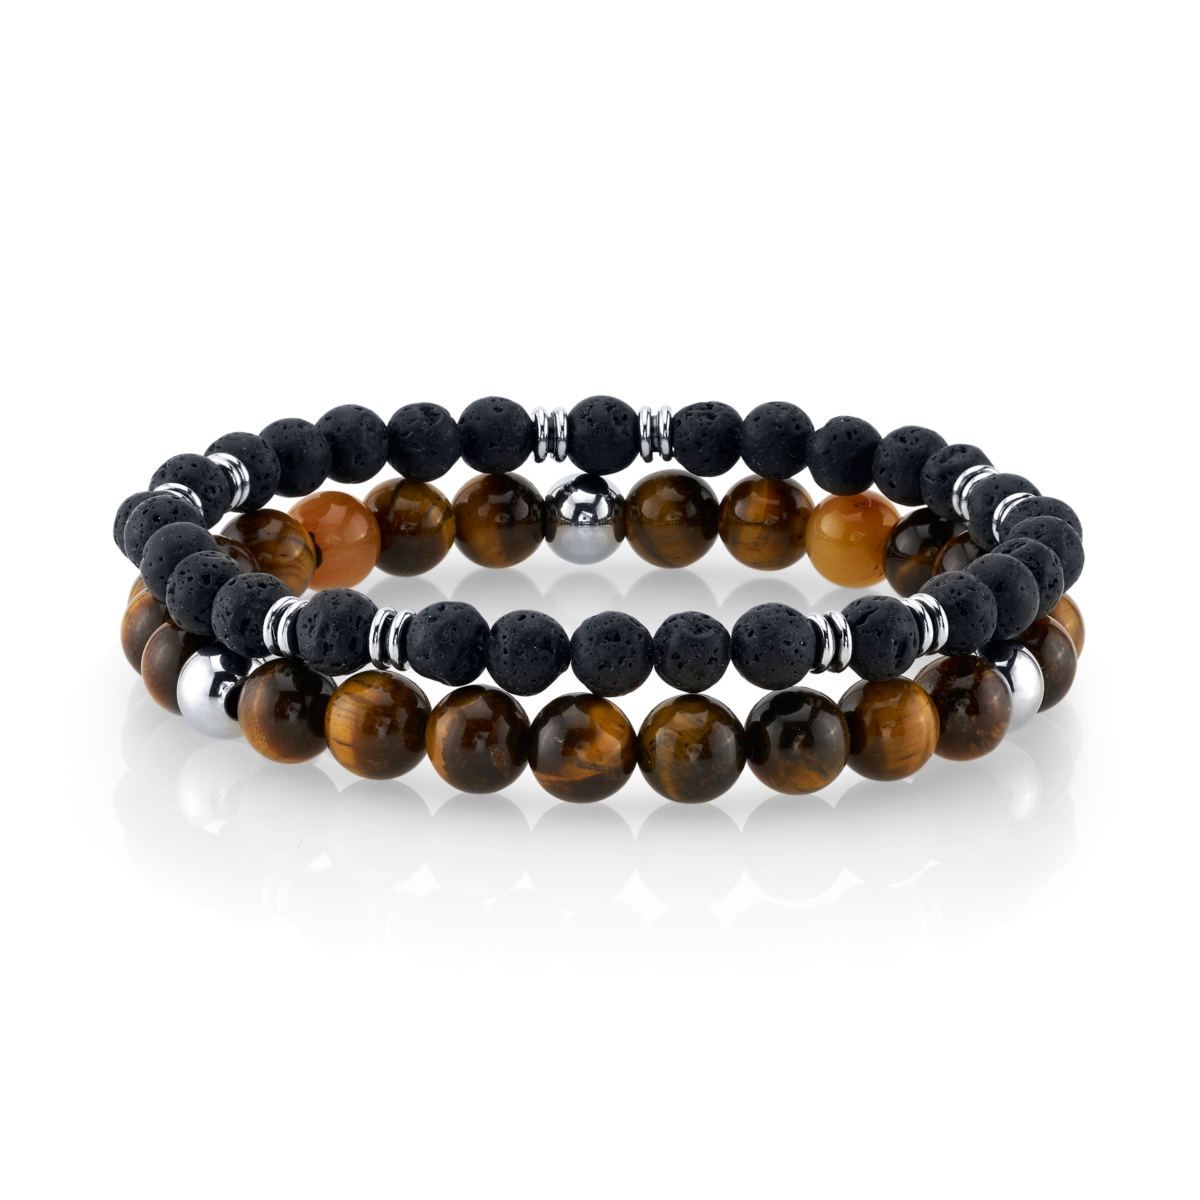 Tiger Eye Stone and Black Lava Bead Double Bracelet with Stainless Steel Beads, 8.5" - Black/Brown/Stainless Steel